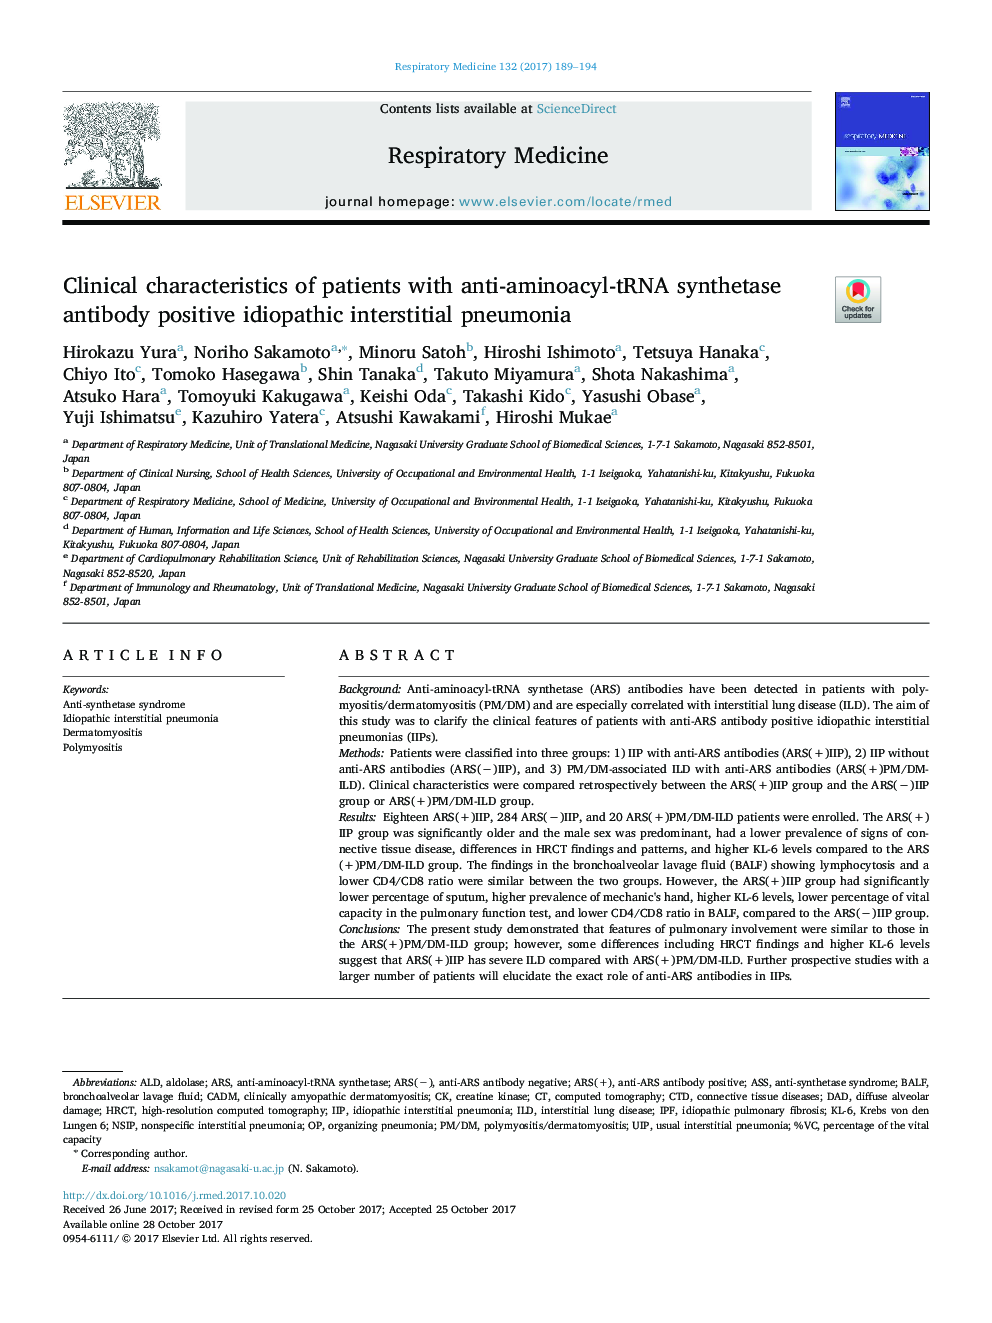 Clinical characteristics of patients with anti-aminoacyl-tRNA synthetase antibody positive idiopathic interstitial pneumonia